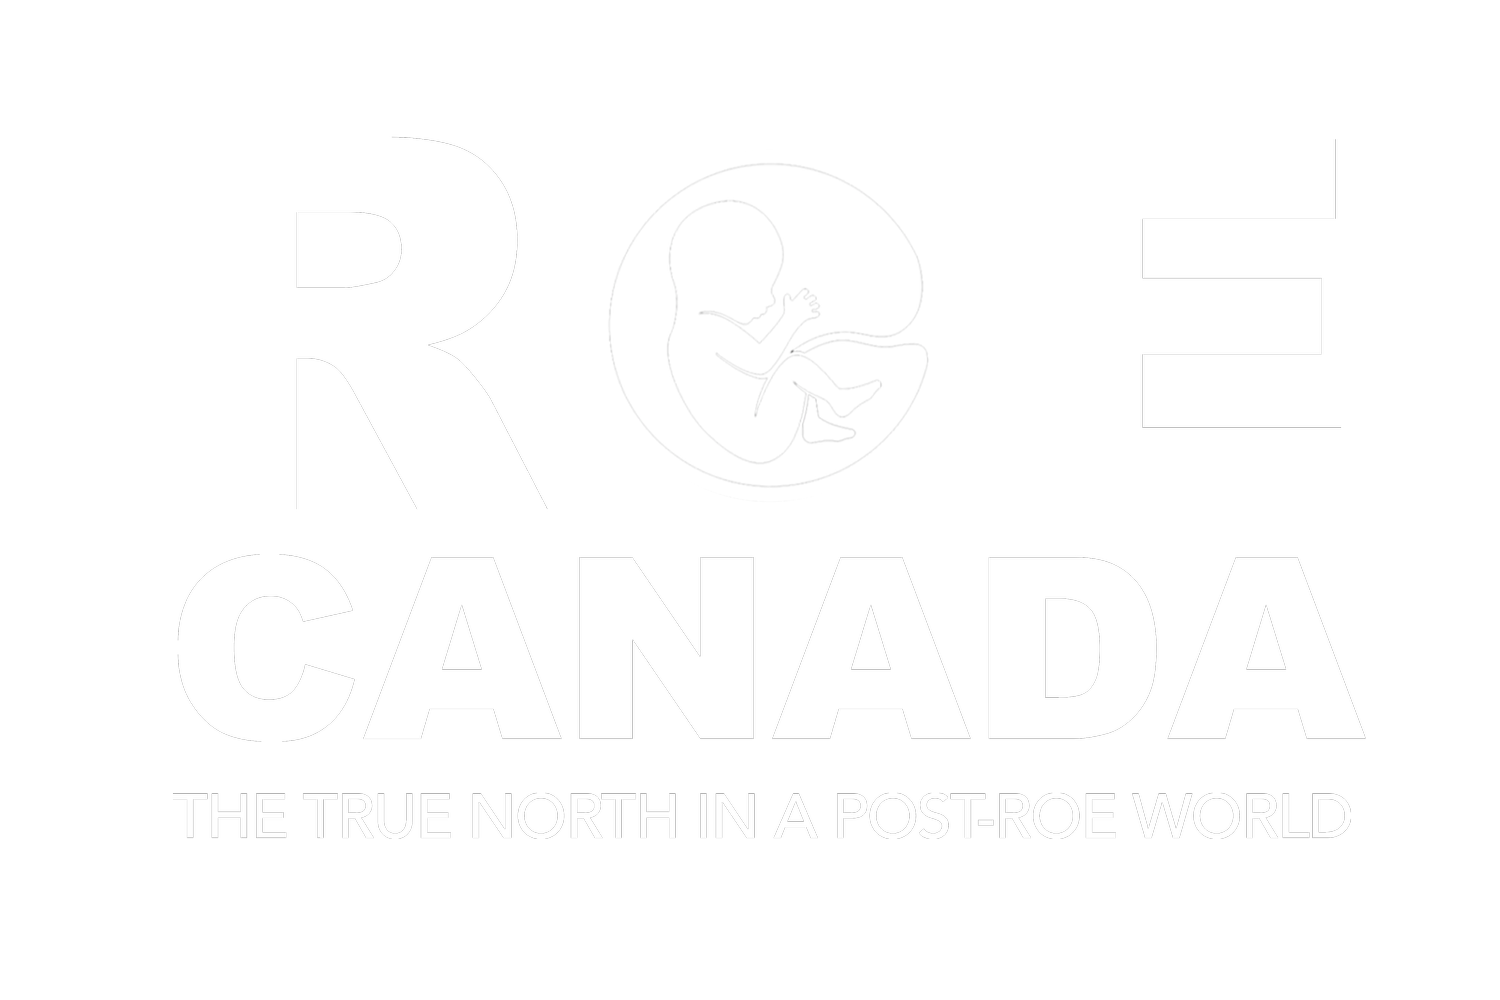 Roe Canada the Film